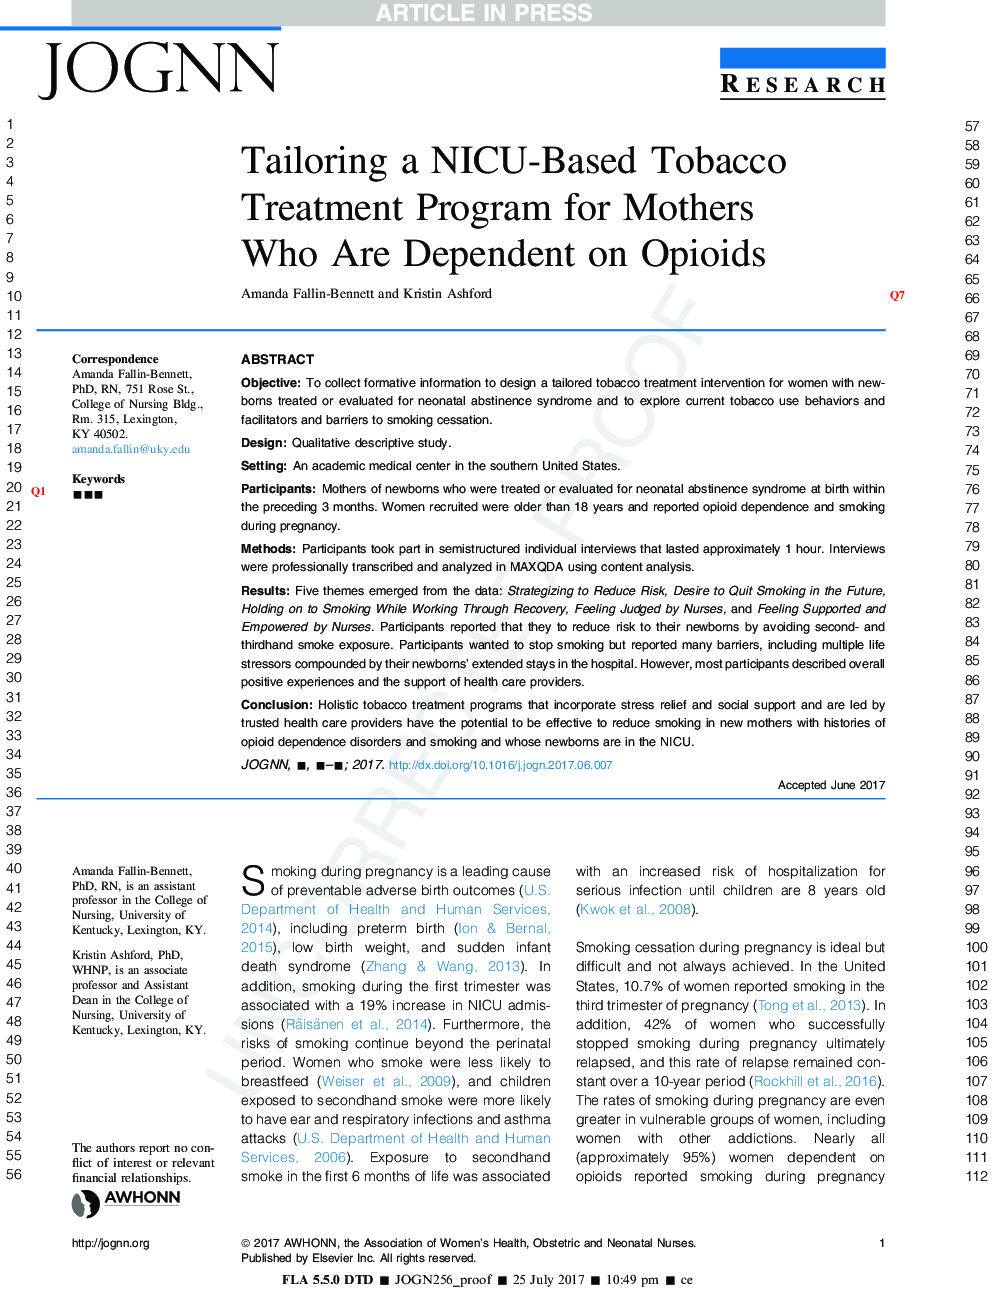 Tailoring a NICU-Based Tobacco Treatment Program for Mothers Who Are Dependent on Opioids